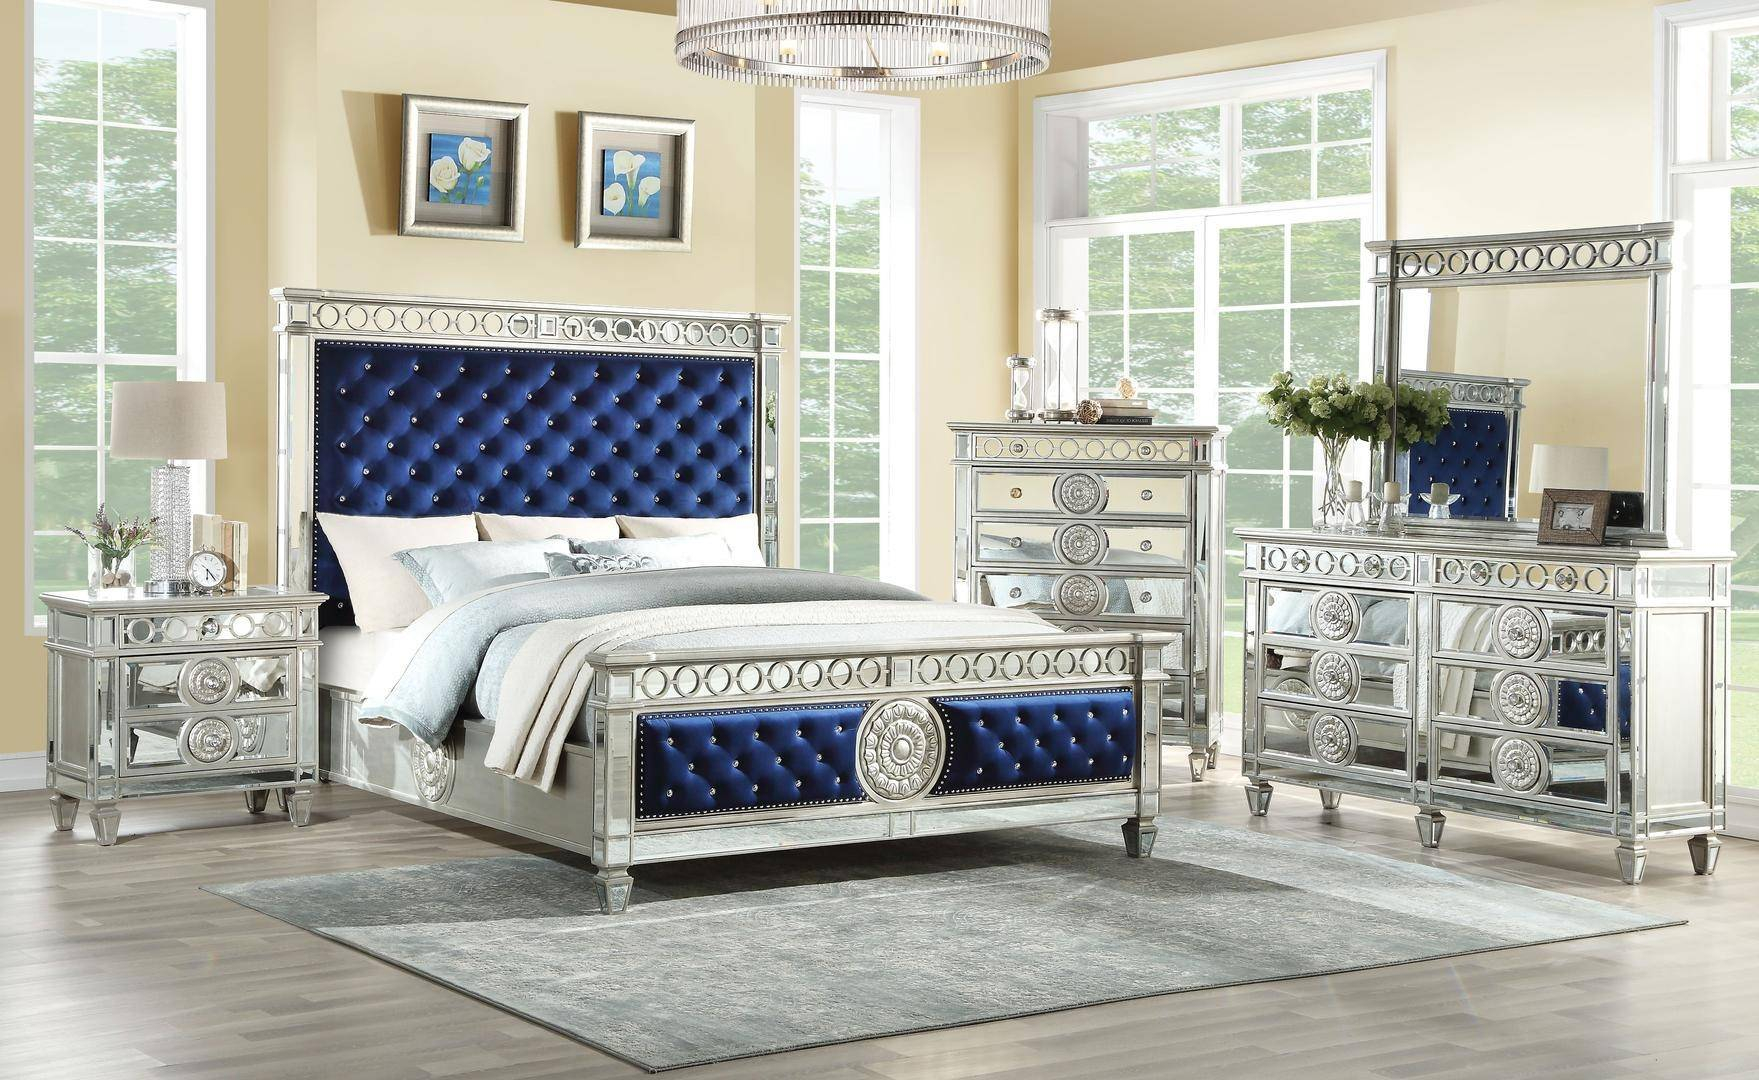 Glam Queen Bedroom Set 3 Blue Tufted Velvet Mirrored Inlay Varian within measurements 1759 X 1080